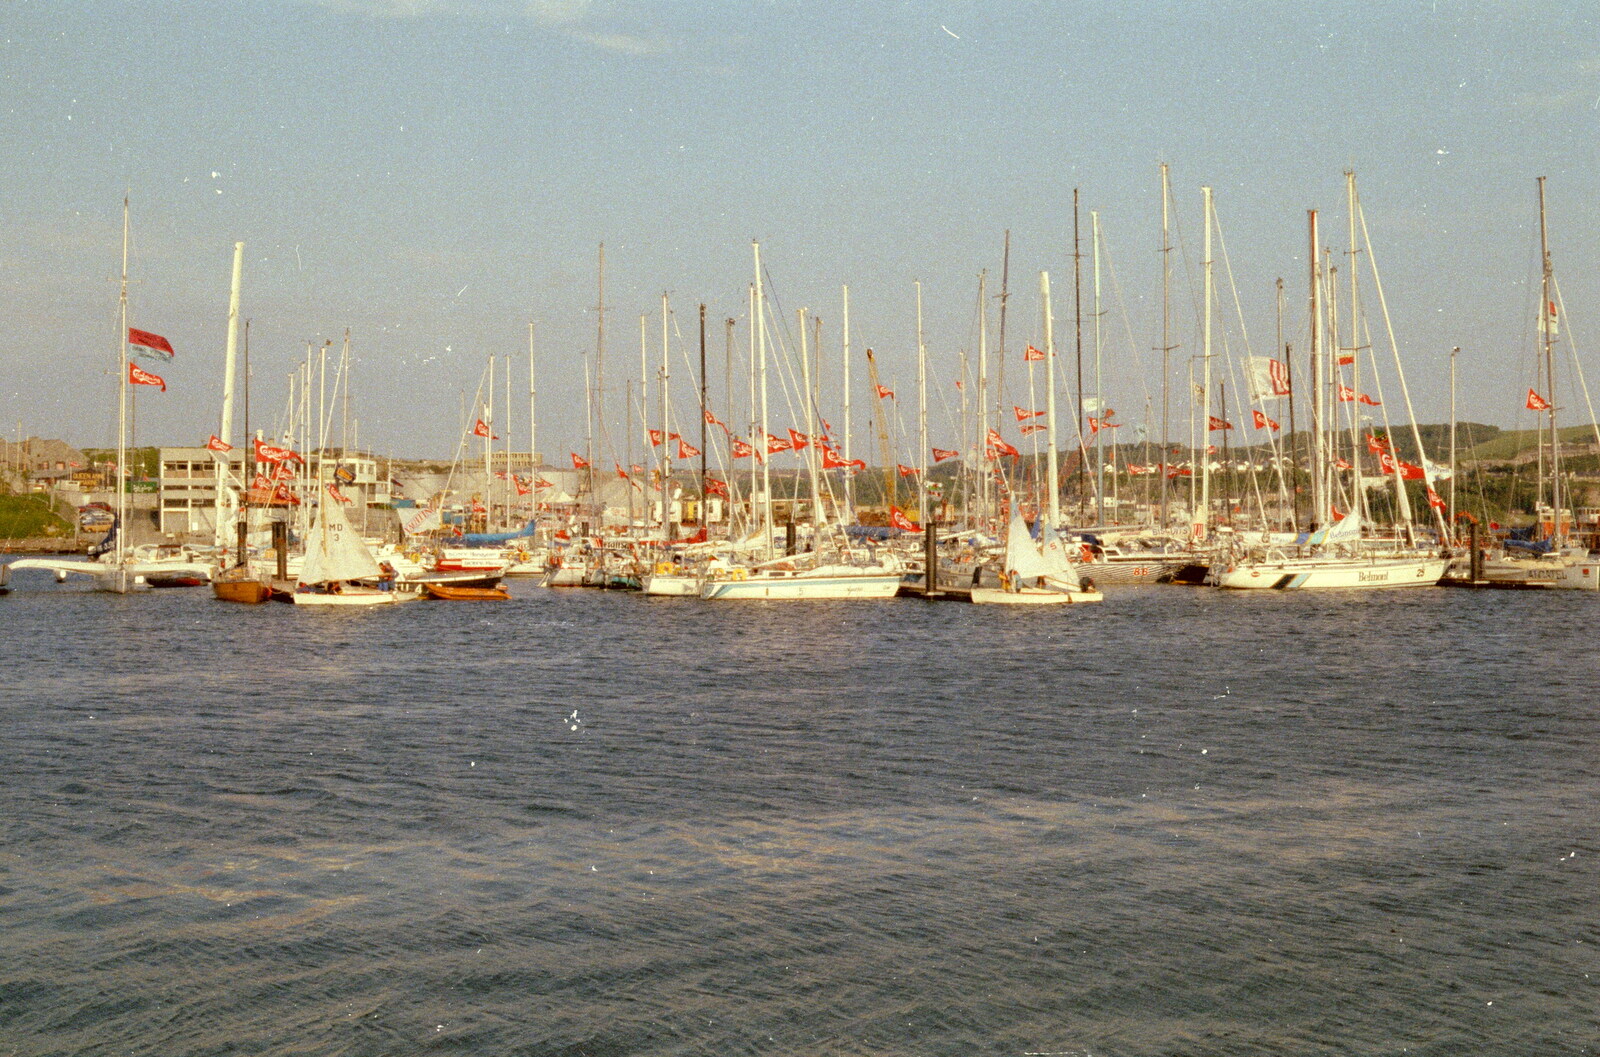 The yacht marina is full for a race from Uni: Scenes of Plymouth and the PPSU Bar, Plymouth Polytechnic, Devon - 28th April 1986